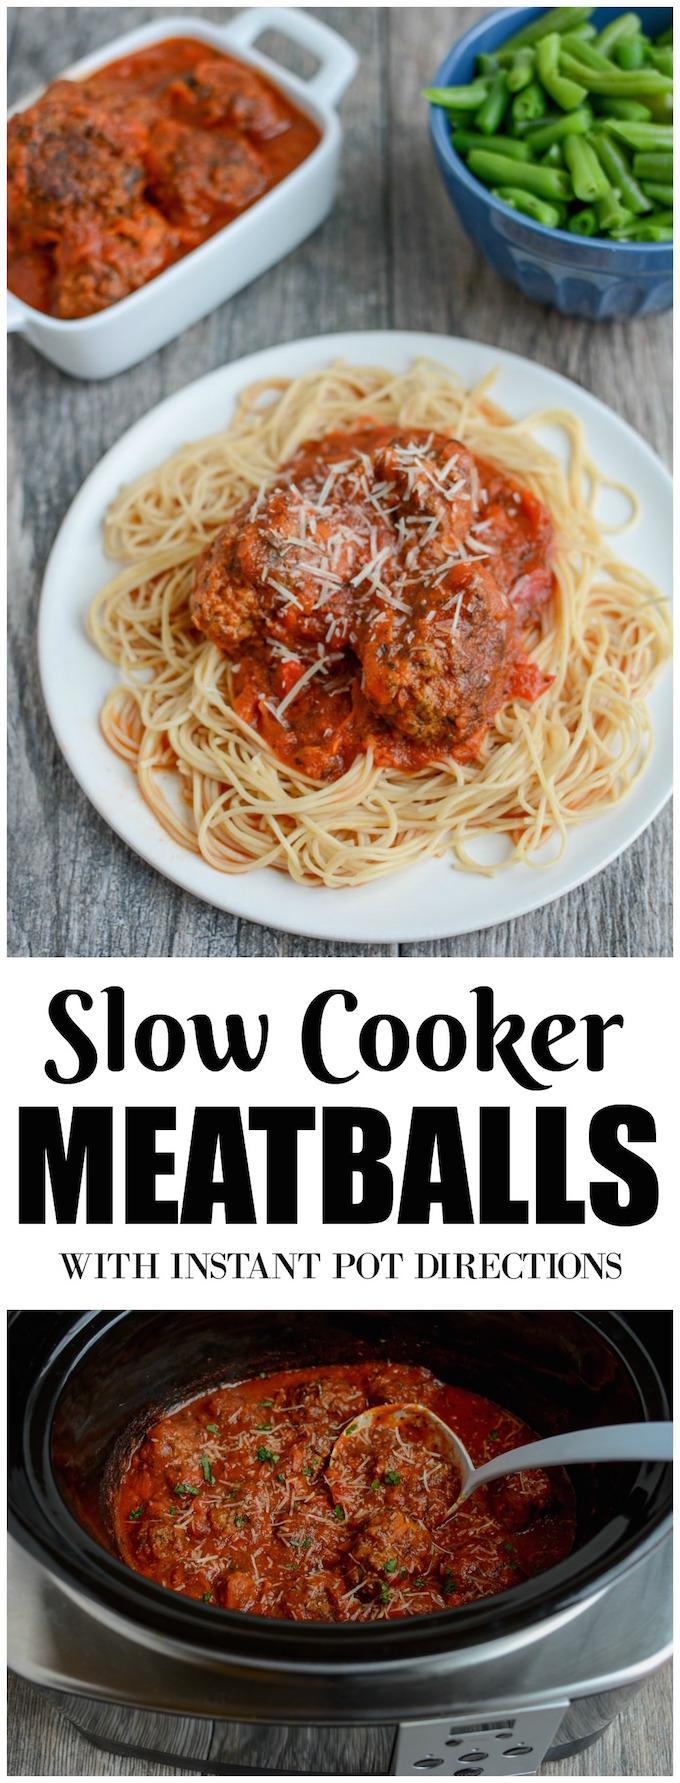 These healthy Slow Cooker meatballs are veggie-packed and great for an easy, kid-friendly dinner. You can also make them in the Instant Pot!